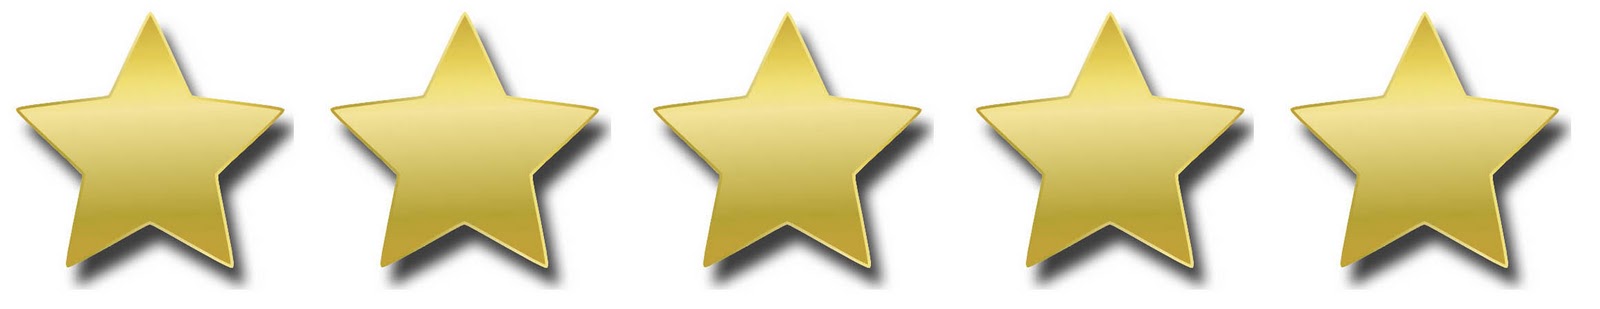 Pictures Of 5 Stars